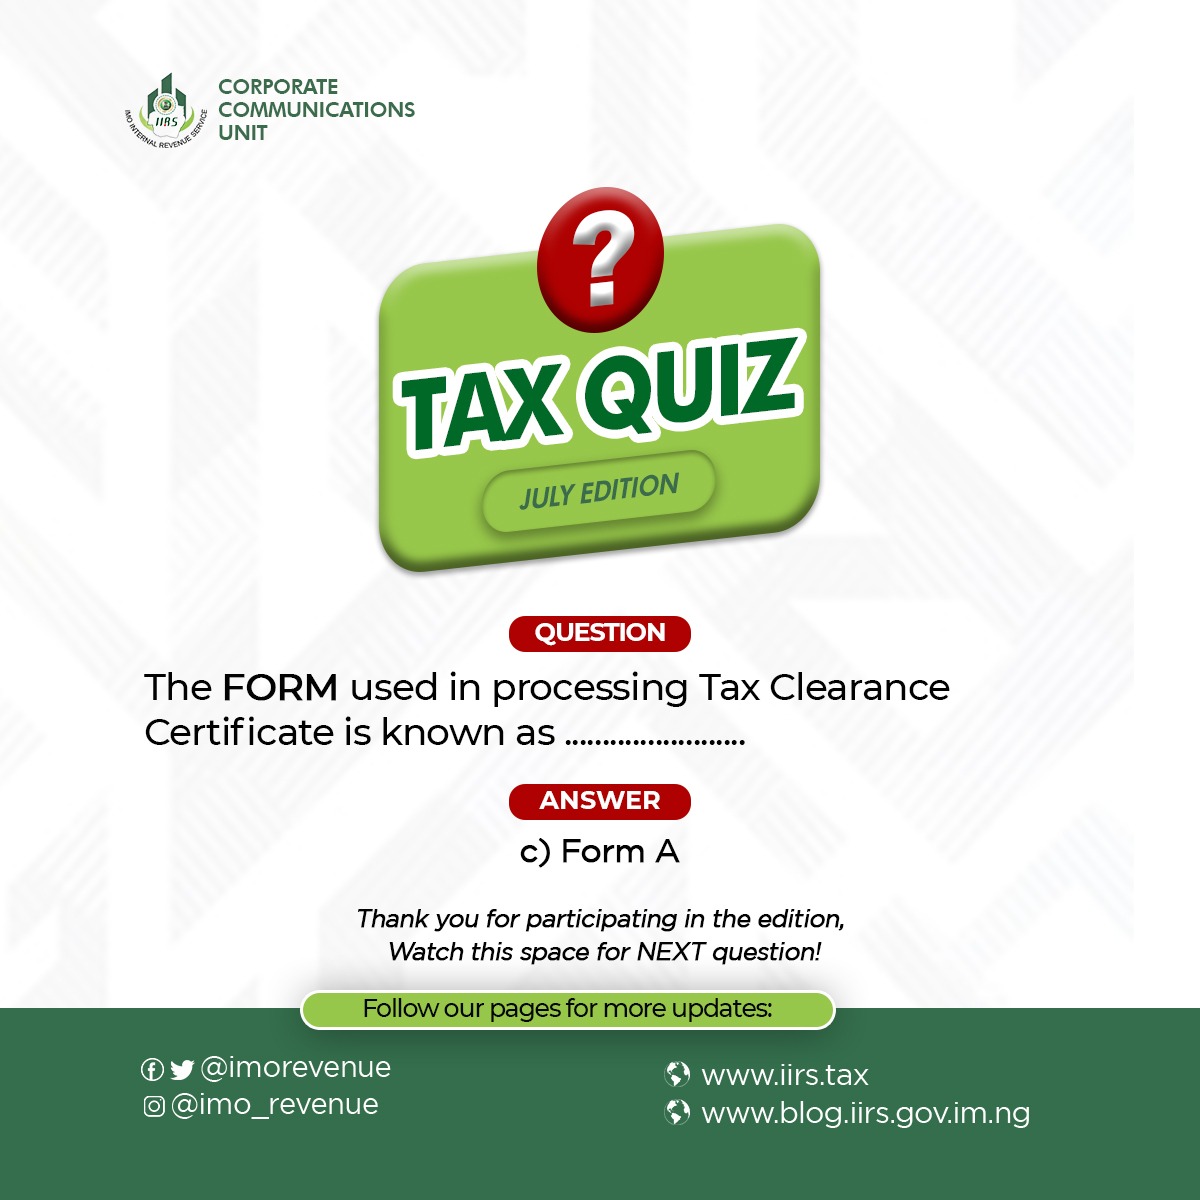 #TaxQuizAnswer #TCC #FormA 
#TaxEducation #ImoRevenue